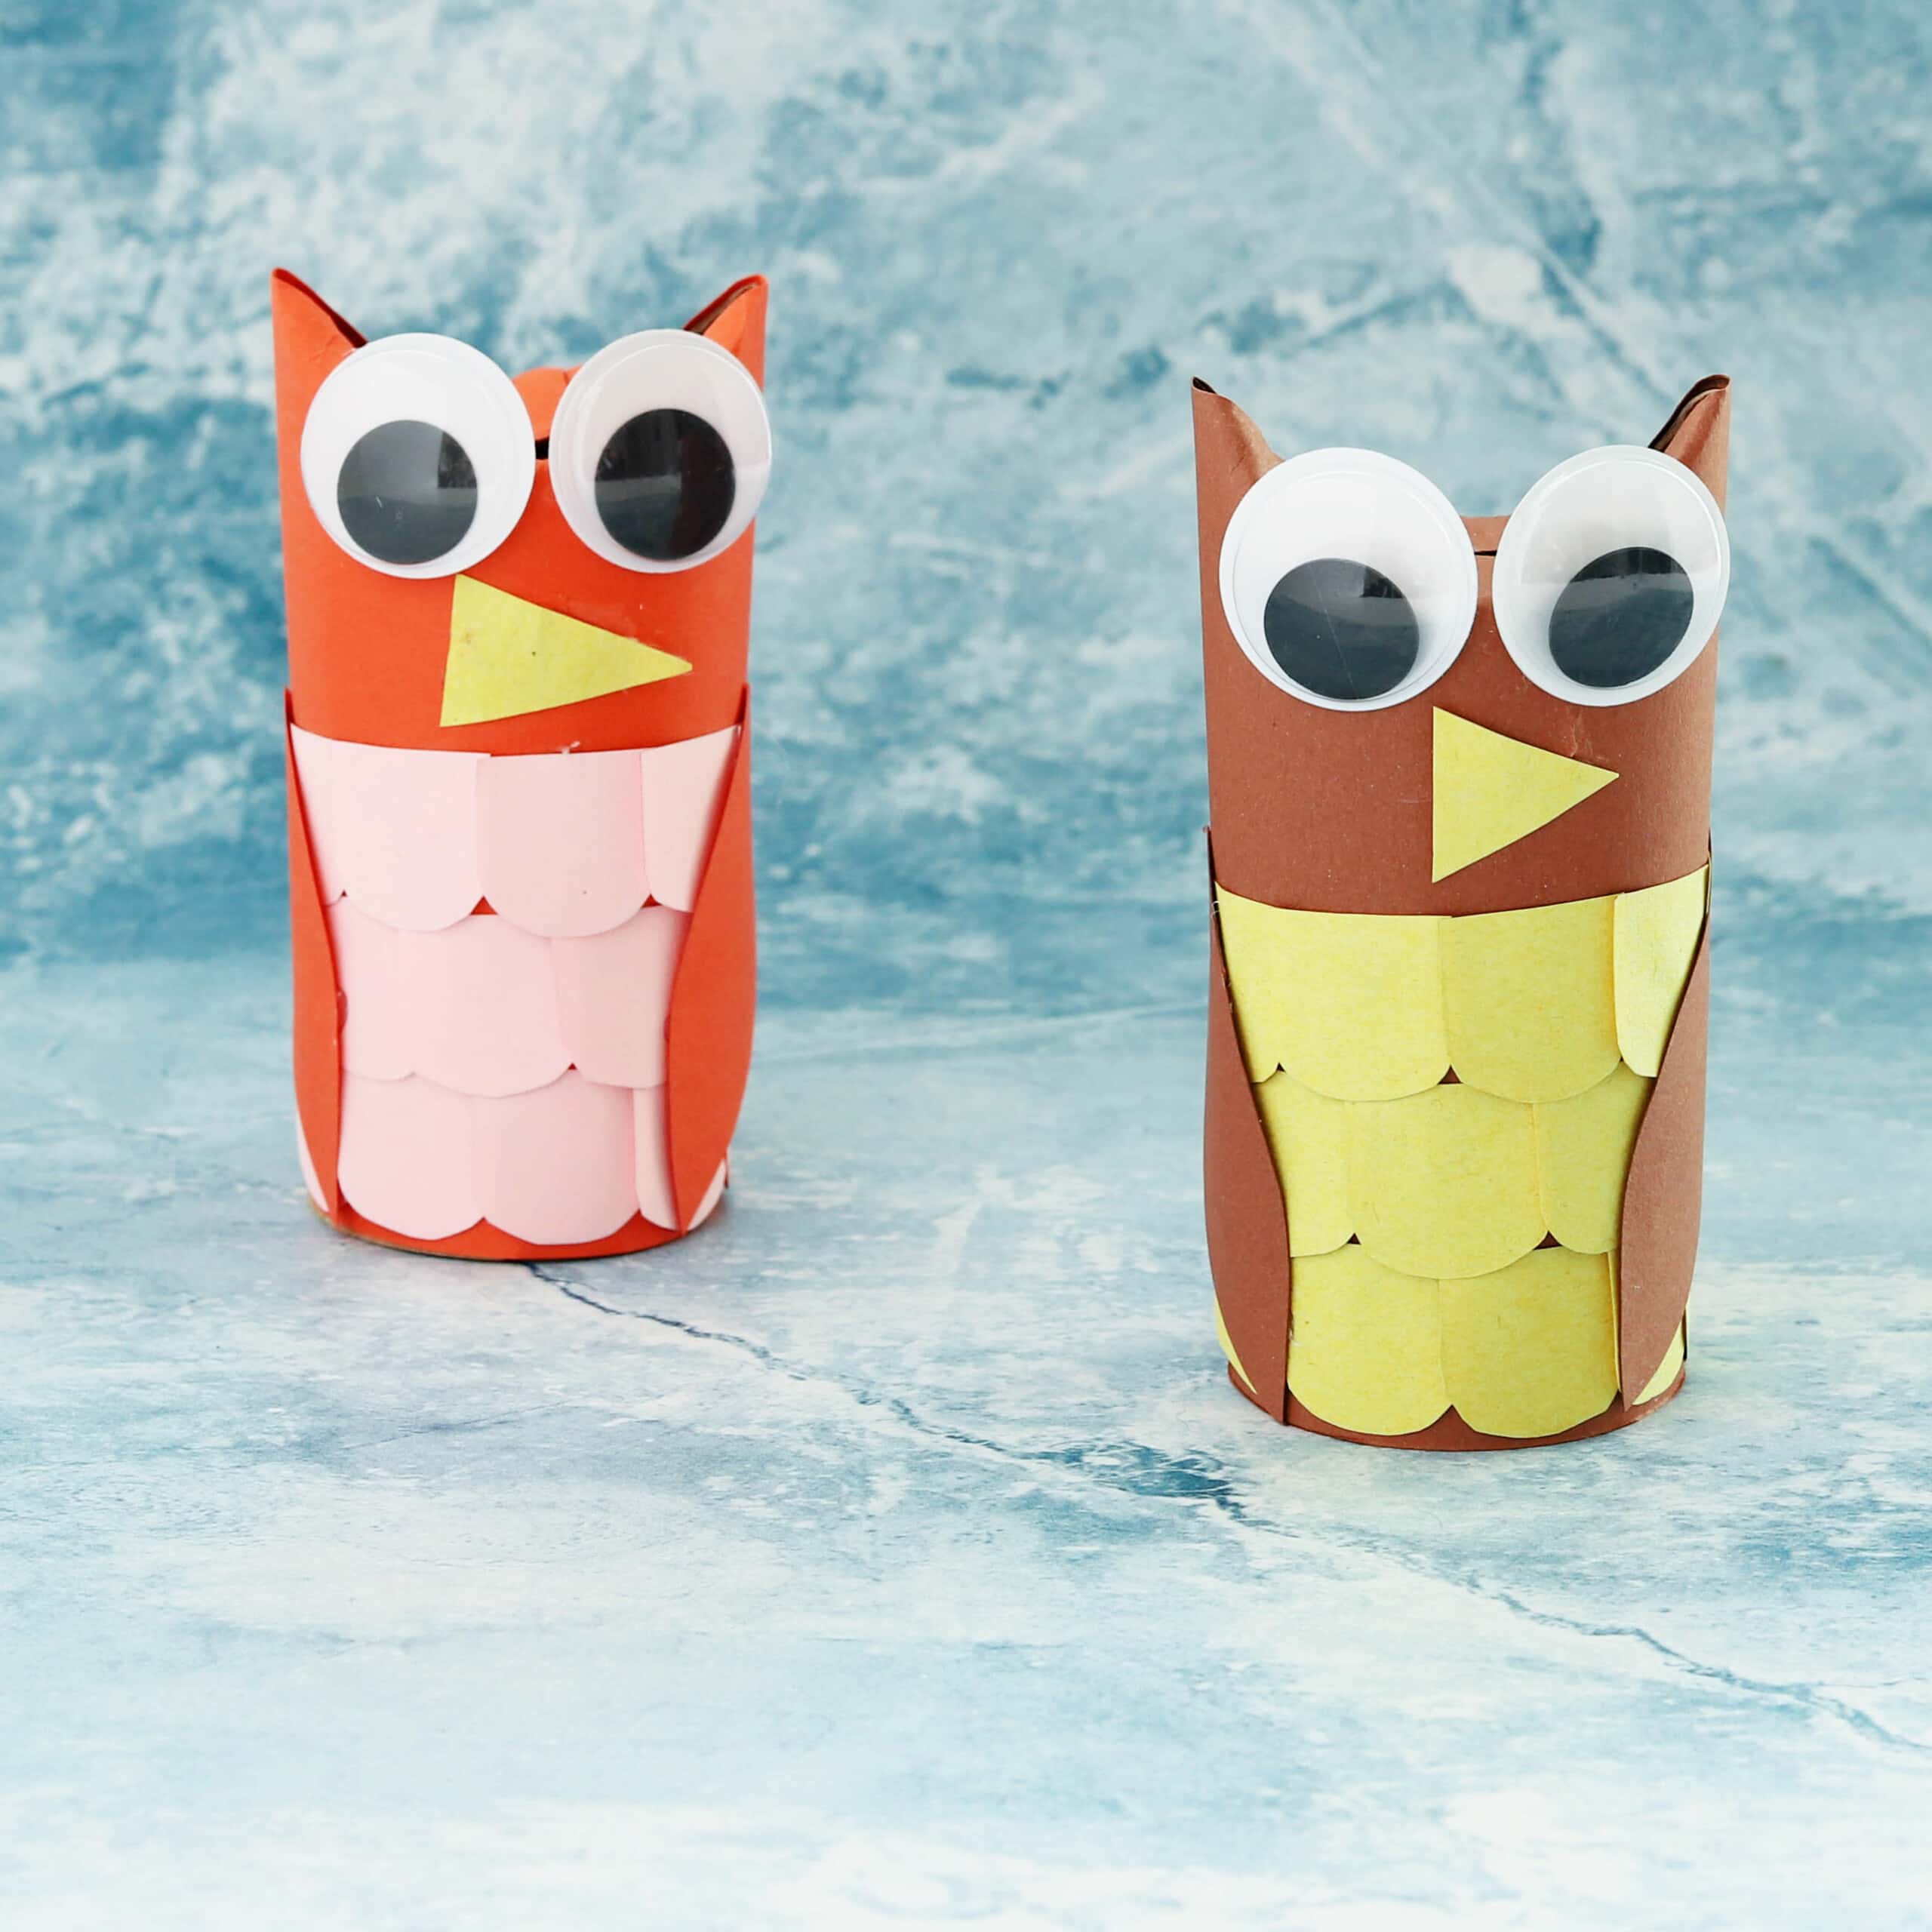 How To Make Toilet Paper Roll Owl Crafts | Fun Money Mom